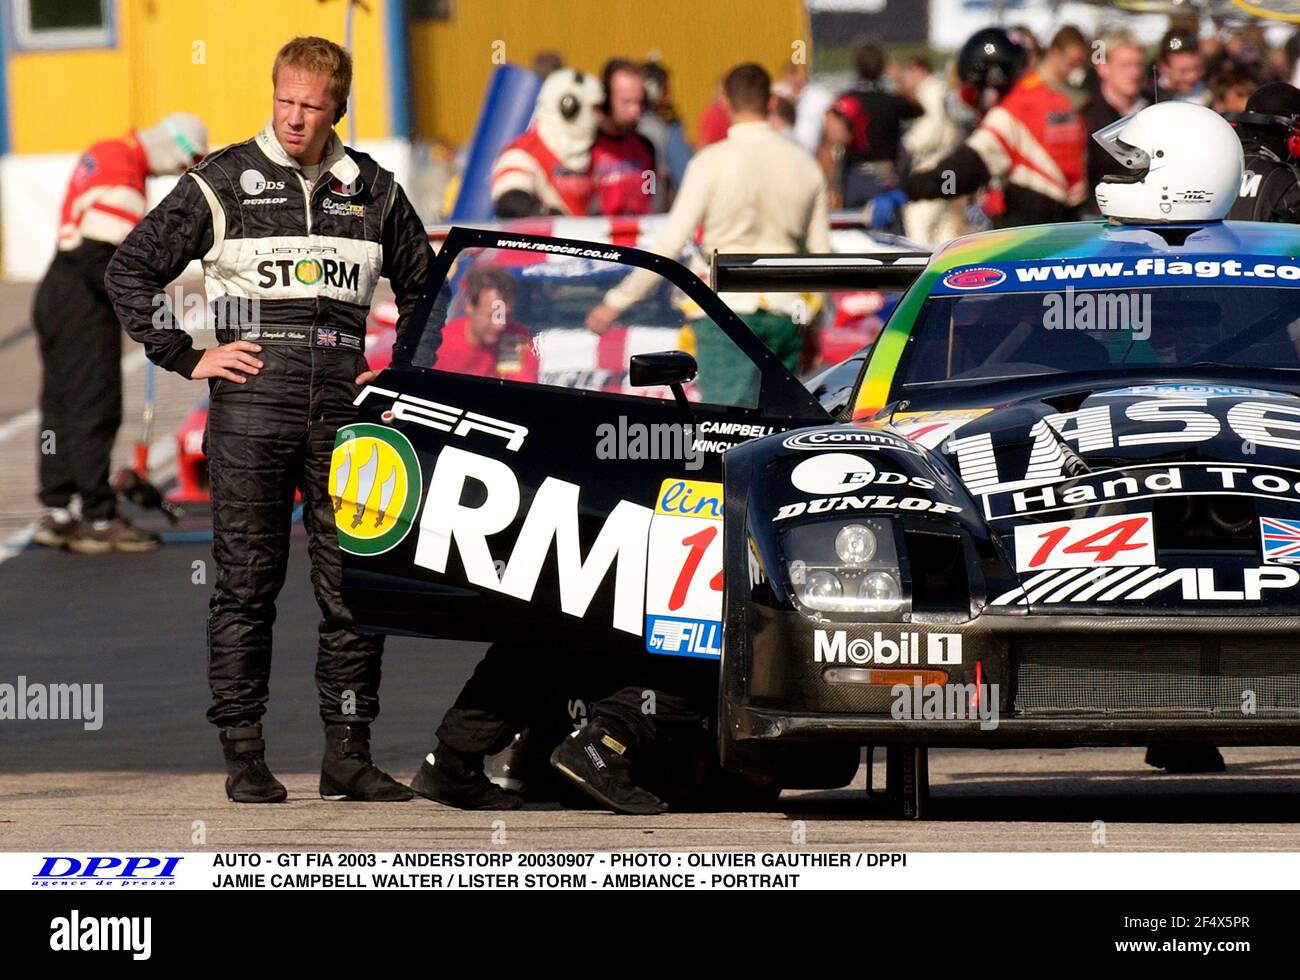 AUTO - GT FIA 2003 - ANDERSTORP 20030907 - PHOTO : OLIVIER GAUTHIER / DPPI JAMIE CAMPBELL WALTER / LISTER STORM - AMBIANCE - PORTRAIT Stock Photo